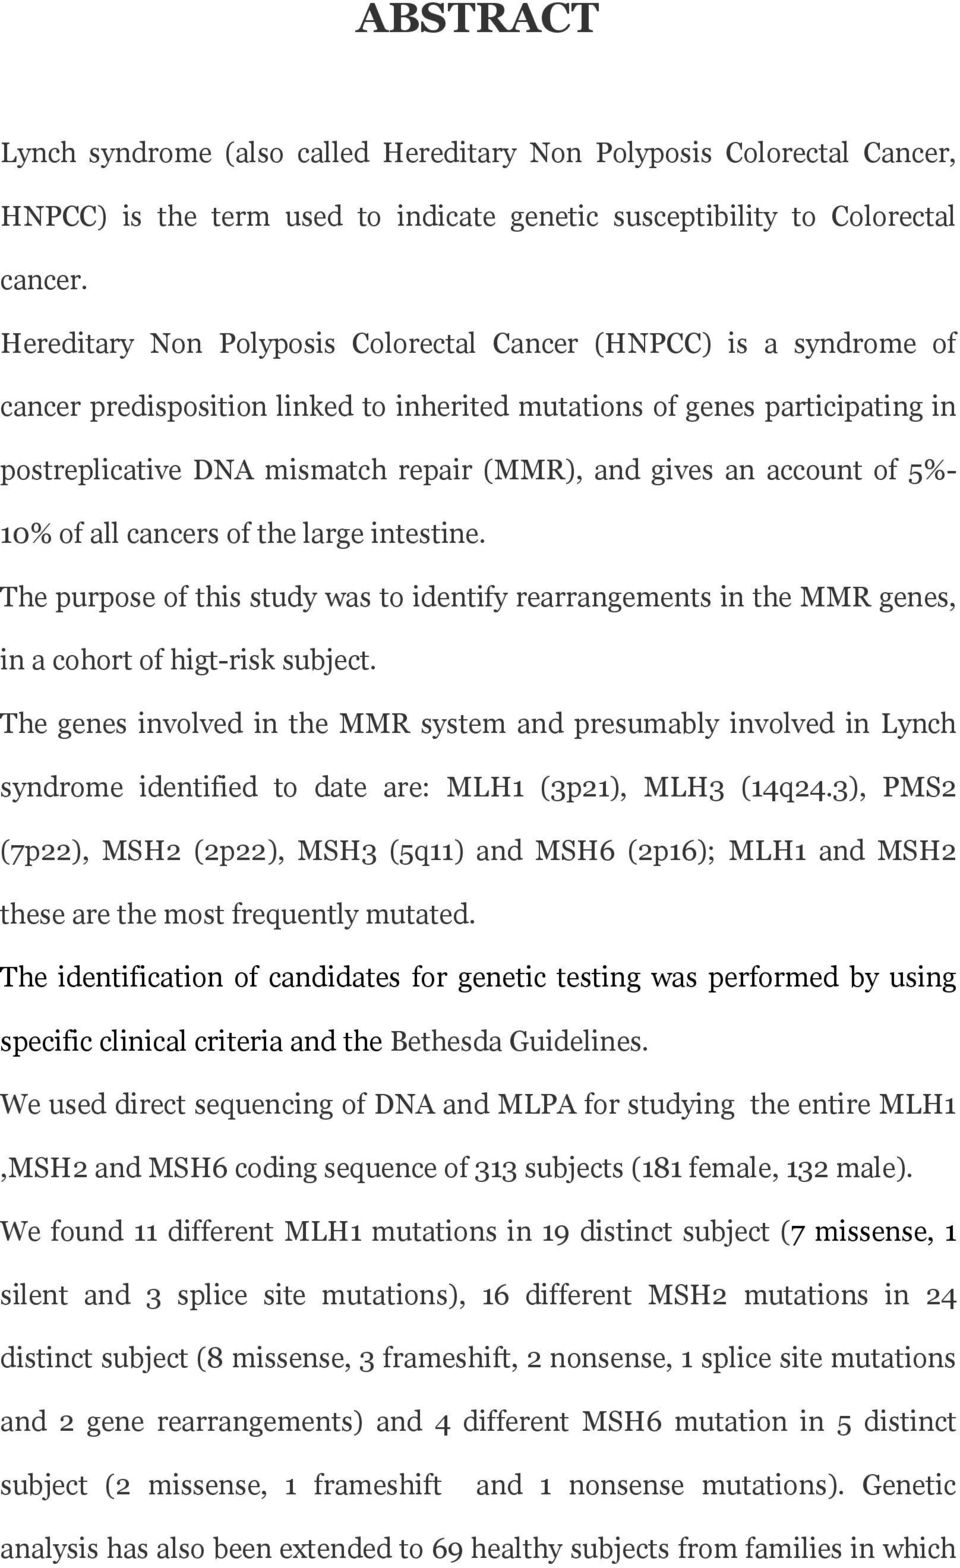 an account of 5%- 10% of all cancers of the large intestine. The purpose of this study was to identify rearrangements in the MMR genes, in a cohort of higt-risk subject.